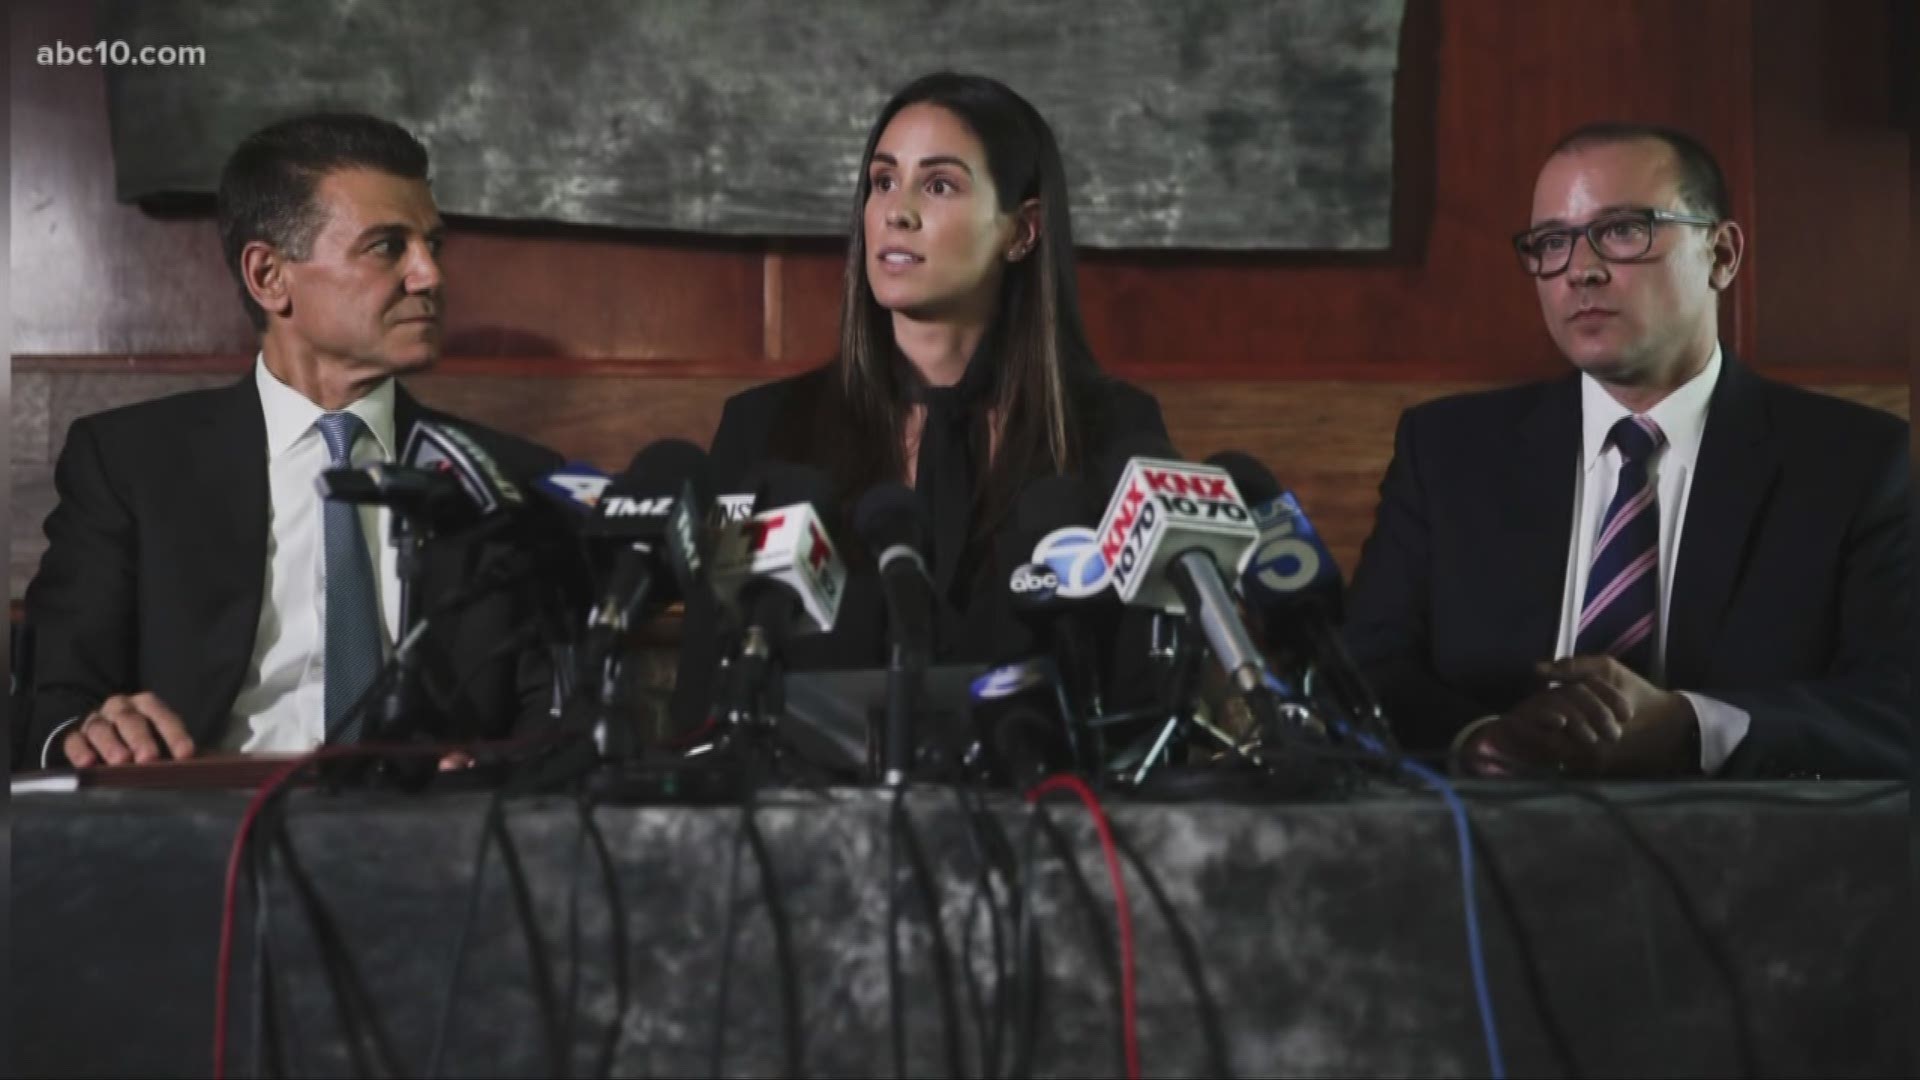 The Sacramento Kings announced Thursday that it will launch a joint investigation with the NBA about new head coach Luke Walton's alleged sexual assault of a sports reporter. Watch #MorningBlend10 weekdays at 5-7 a.m. for everything you need to know to start your day.